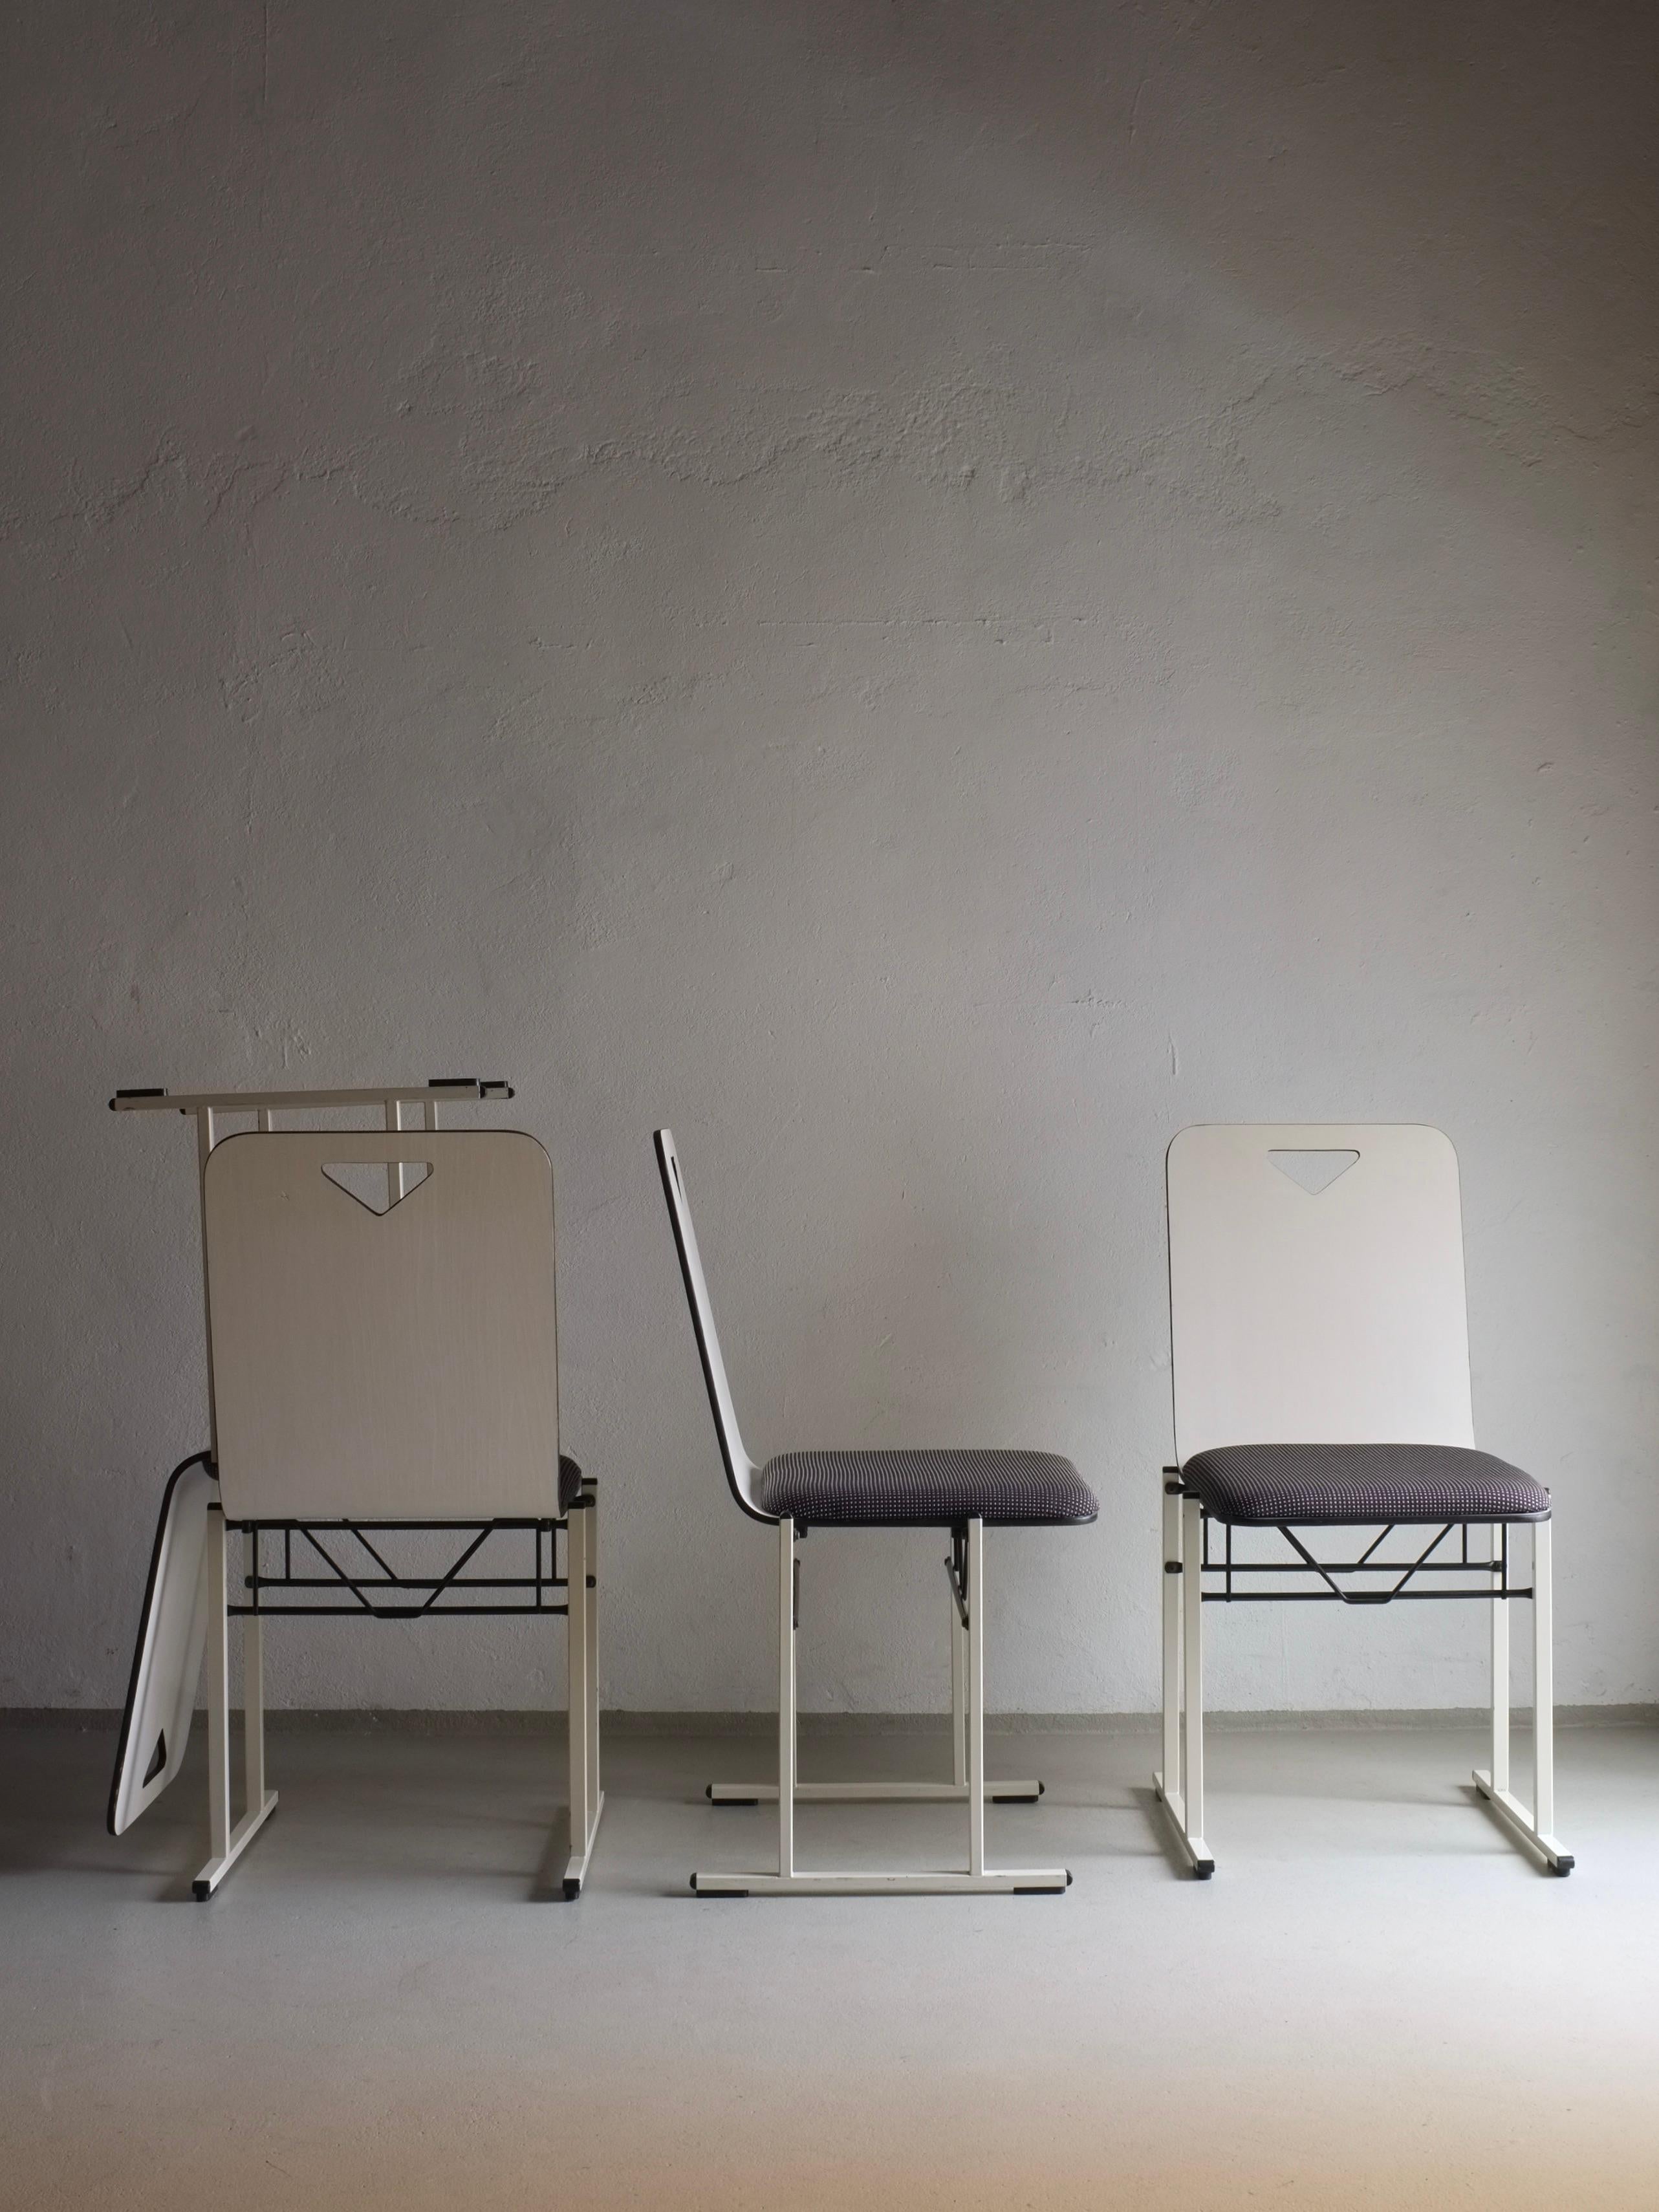 4 White Metal Chairs By Yrjö Kukkapuro For Avarte, Finland 1980s For Sale 6